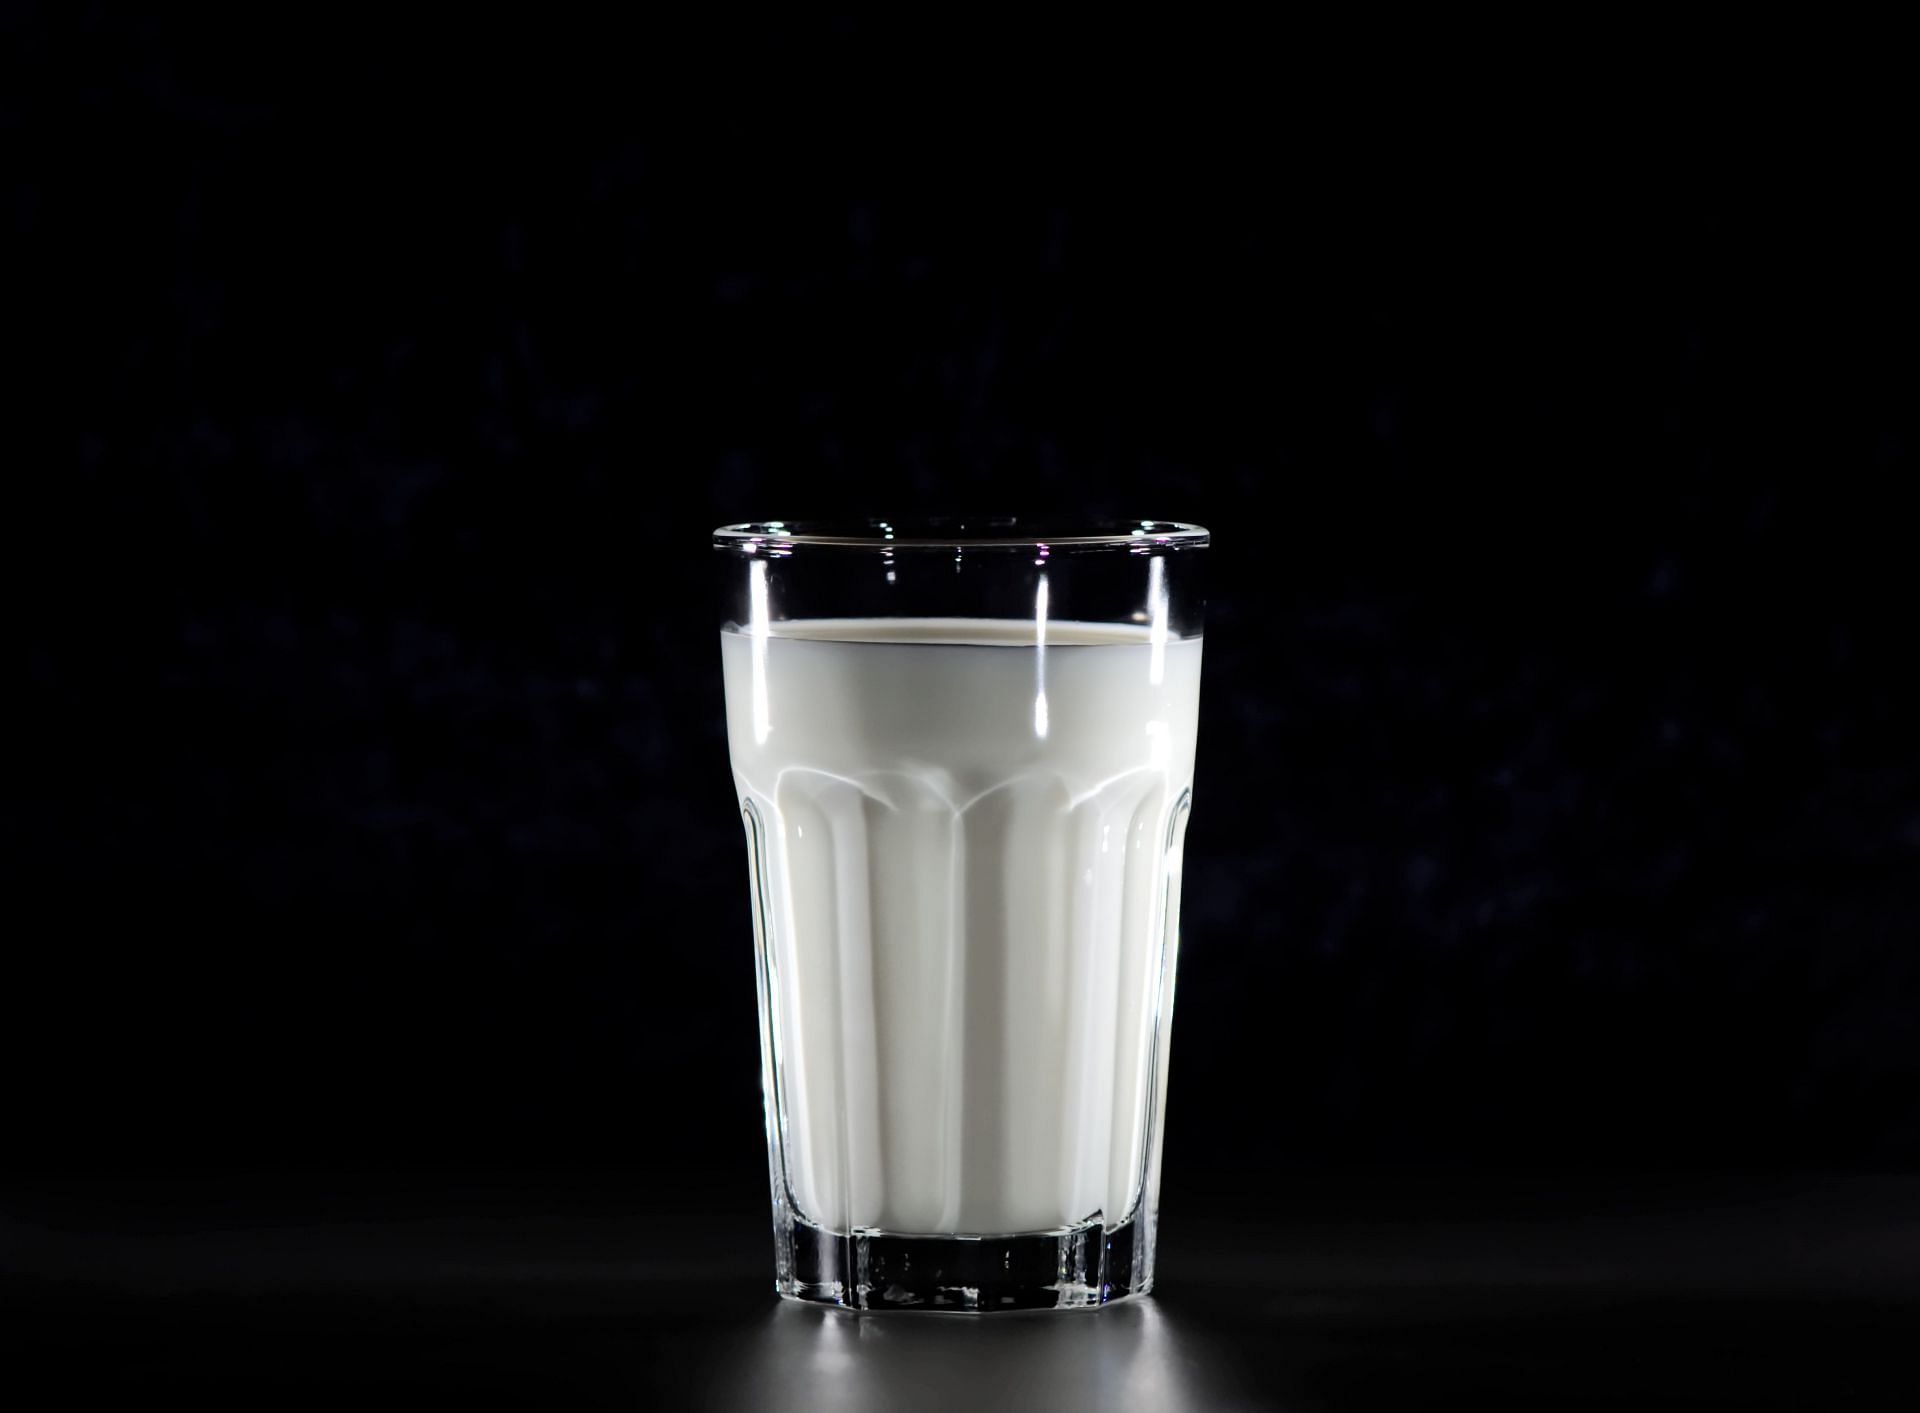 Drinking milk regularly can provide a range of health benefits (Image via Pexels)